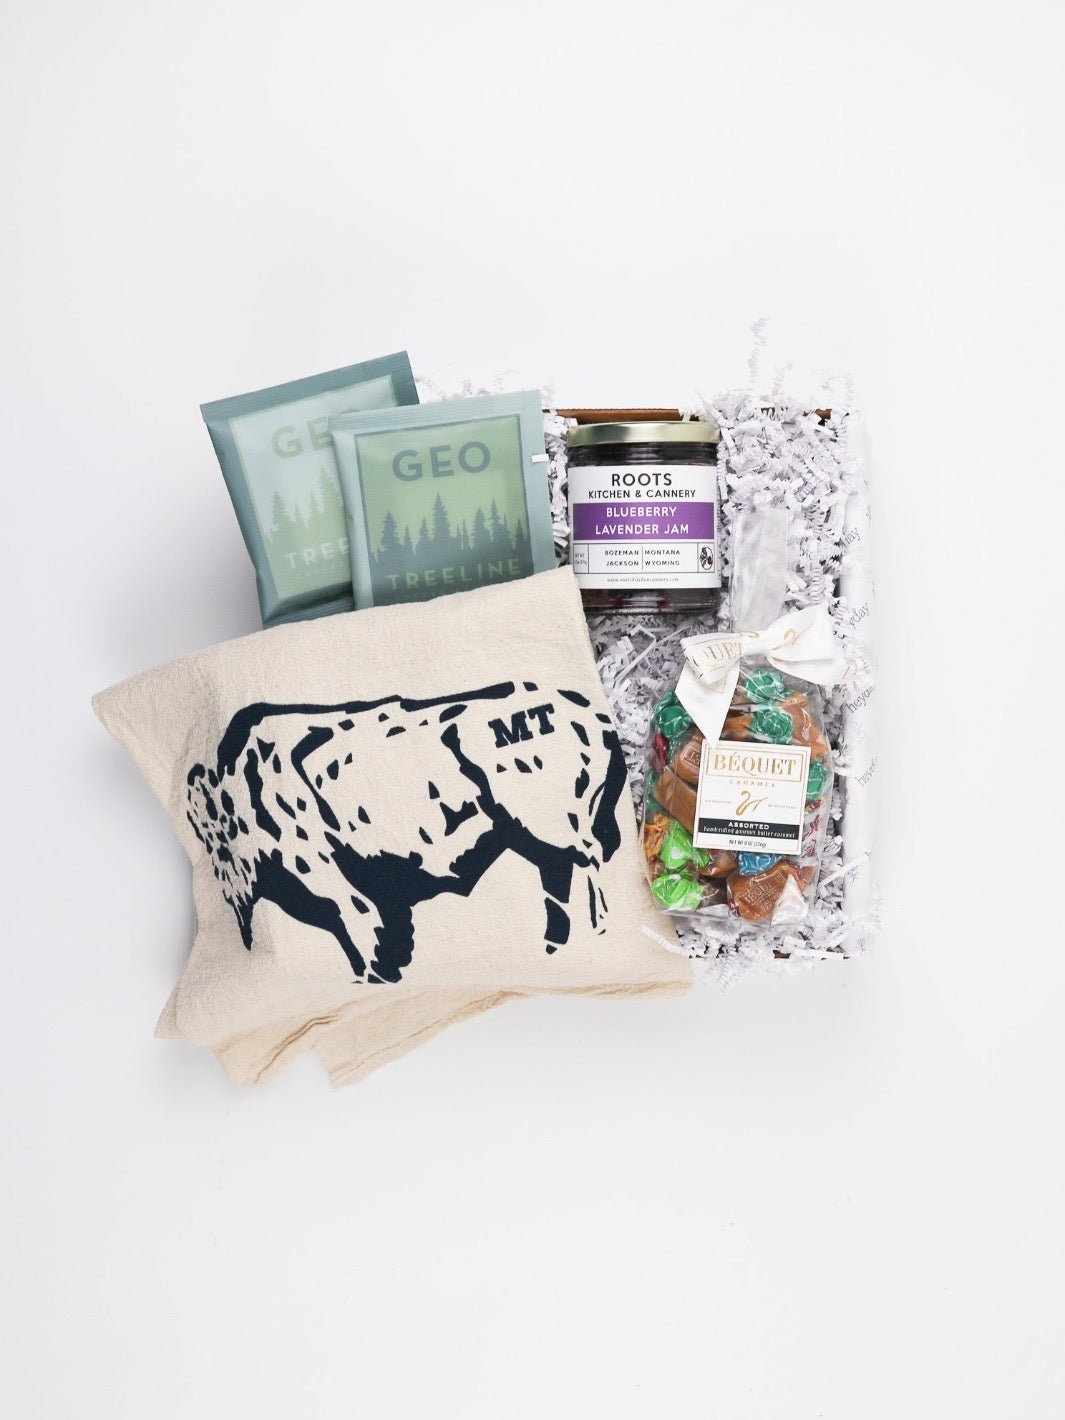 Taste of Montana Curated Gift Box - Heyday